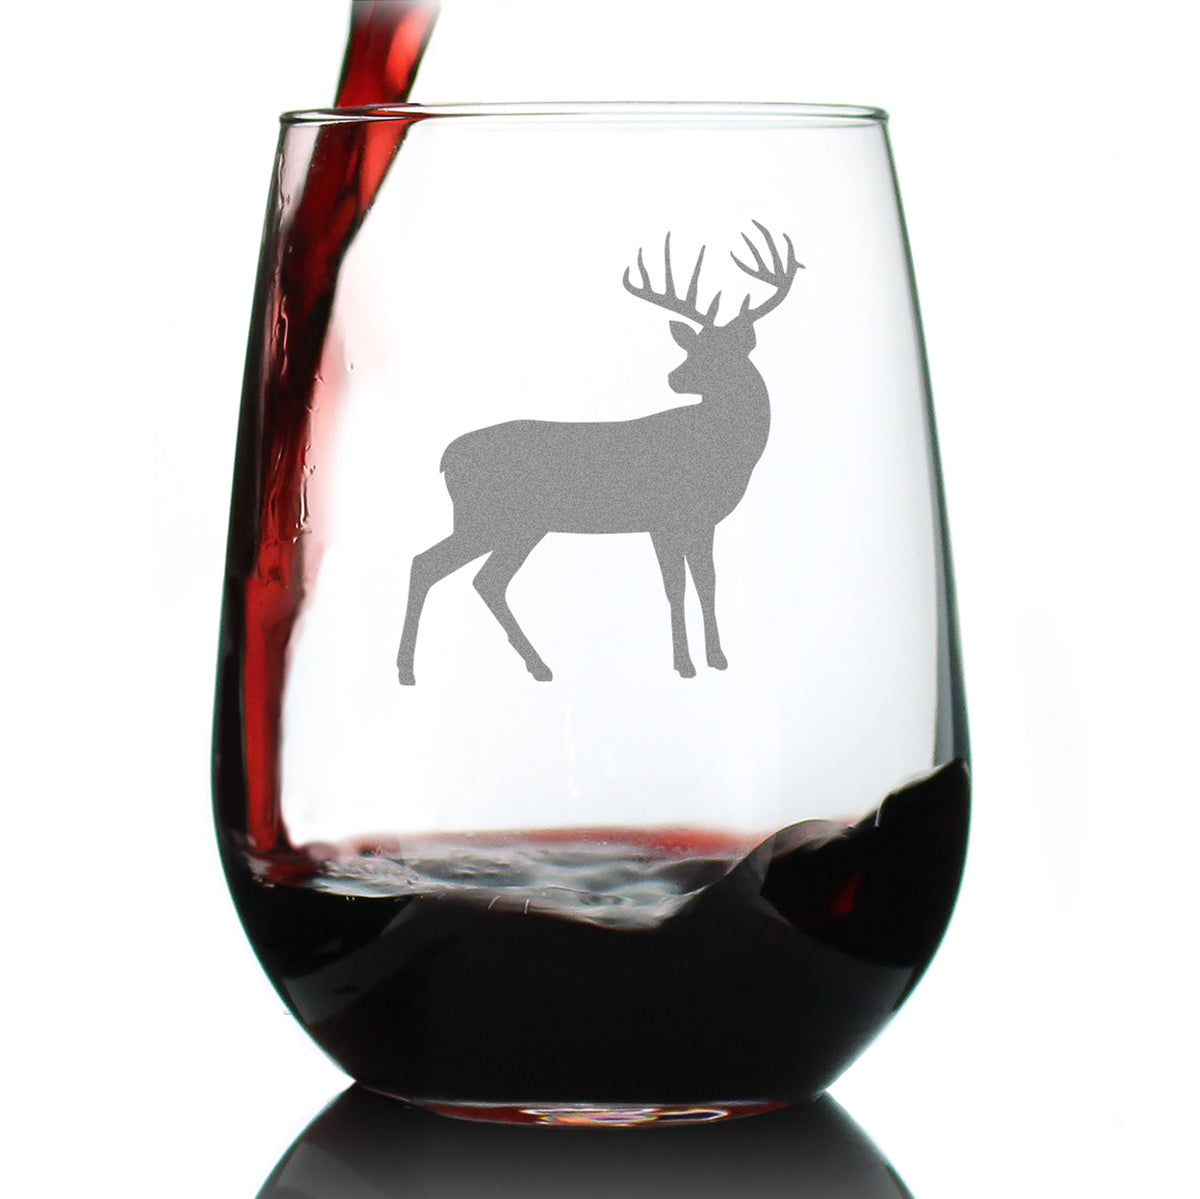 Deer Stemless Wine Glass - Cabin Themed Gifts or Rustic Decor for Women and Men - Engraved Silhouette - Large